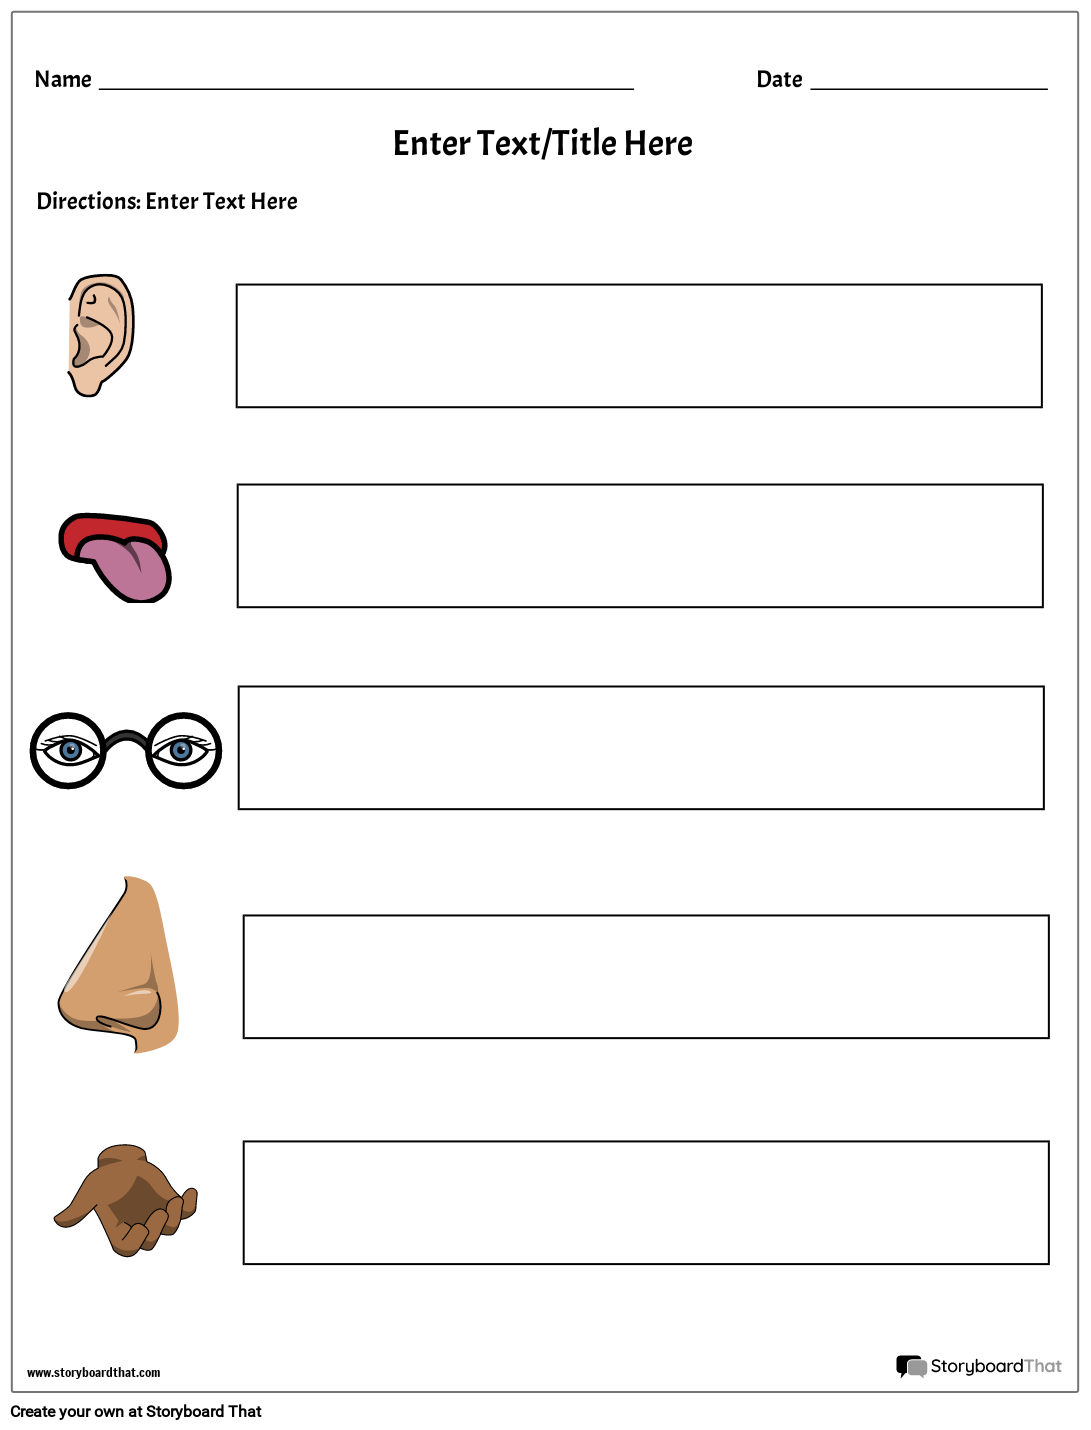 Make Inferences with Your 5 Senses Worksheet